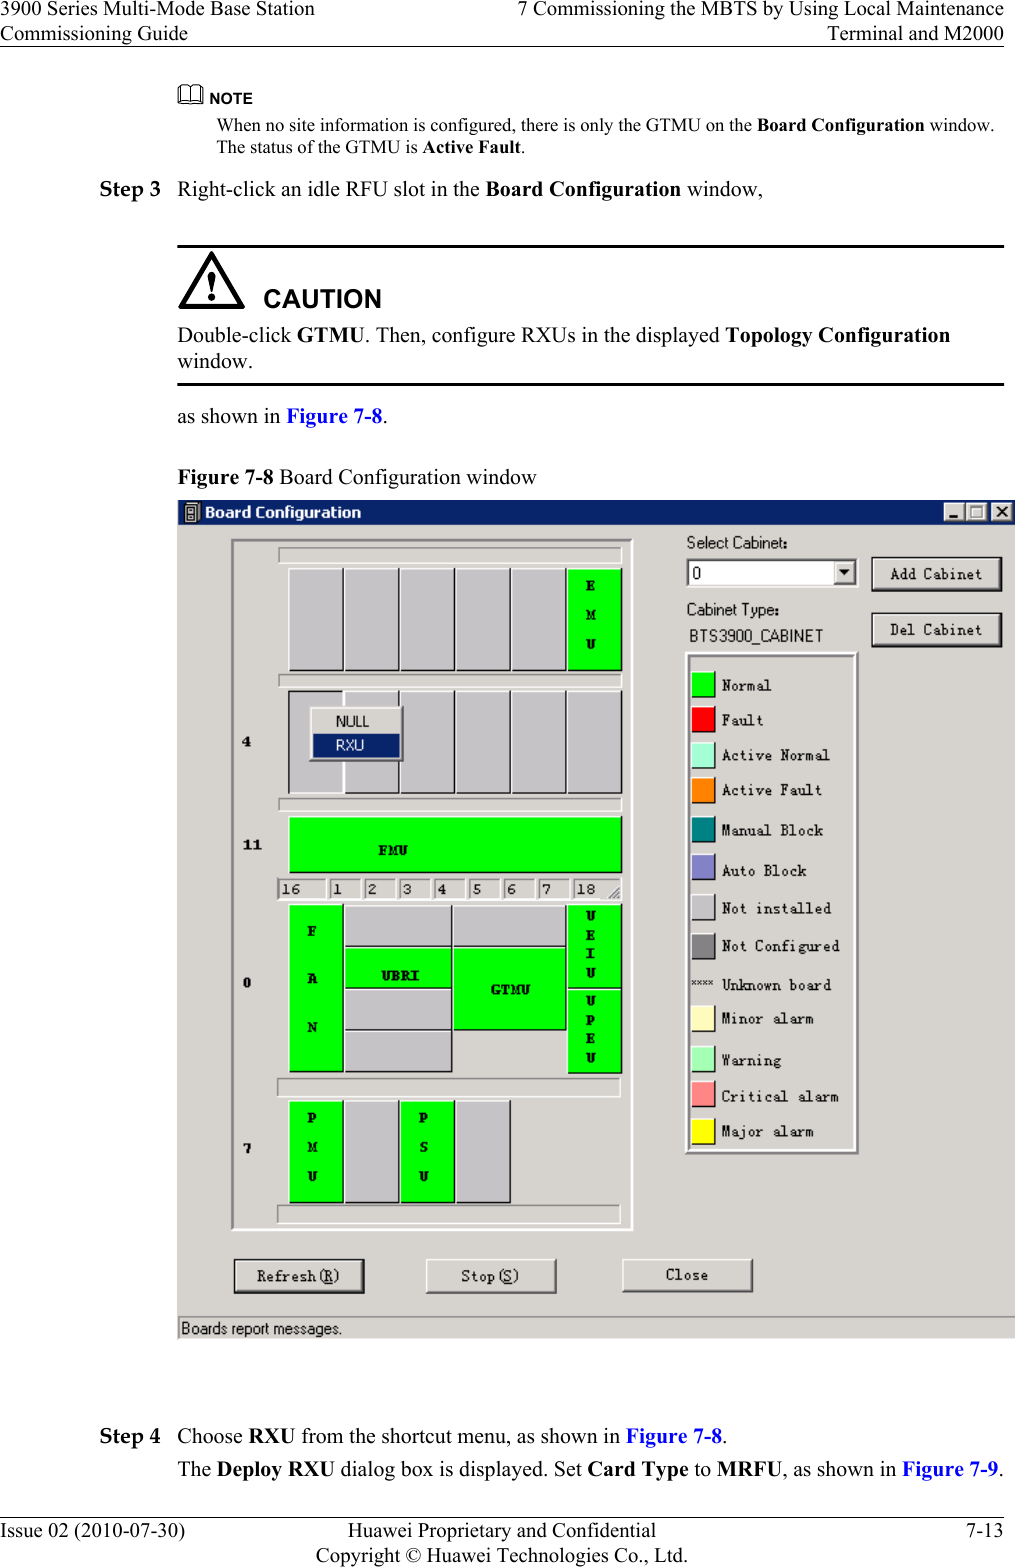 NOTEWhen no site information is configured, there is only the GTMU on the Board Configuration window.The status of the GTMU is Active Fault.Step 3 Right-click an idle RFU slot in the Board Configuration window,CAUTIONDouble-click GTMU. Then, configure RXUs in the displayed Topology Configurationwindow.as shown in Figure 7-8.Figure 7-8 Board Configuration window Step 4 Choose RXU from the shortcut menu, as shown in Figure 7-8.The Deploy RXU dialog box is displayed. Set Card Type to MRFU, as shown in Figure 7-9.3900 Series Multi-Mode Base StationCommissioning Guide7 Commissioning the MBTS by Using Local MaintenanceTerminal and M2000Issue 02 (2010-07-30) Huawei Proprietary and ConfidentialCopyright © Huawei Technologies Co., Ltd.7-13